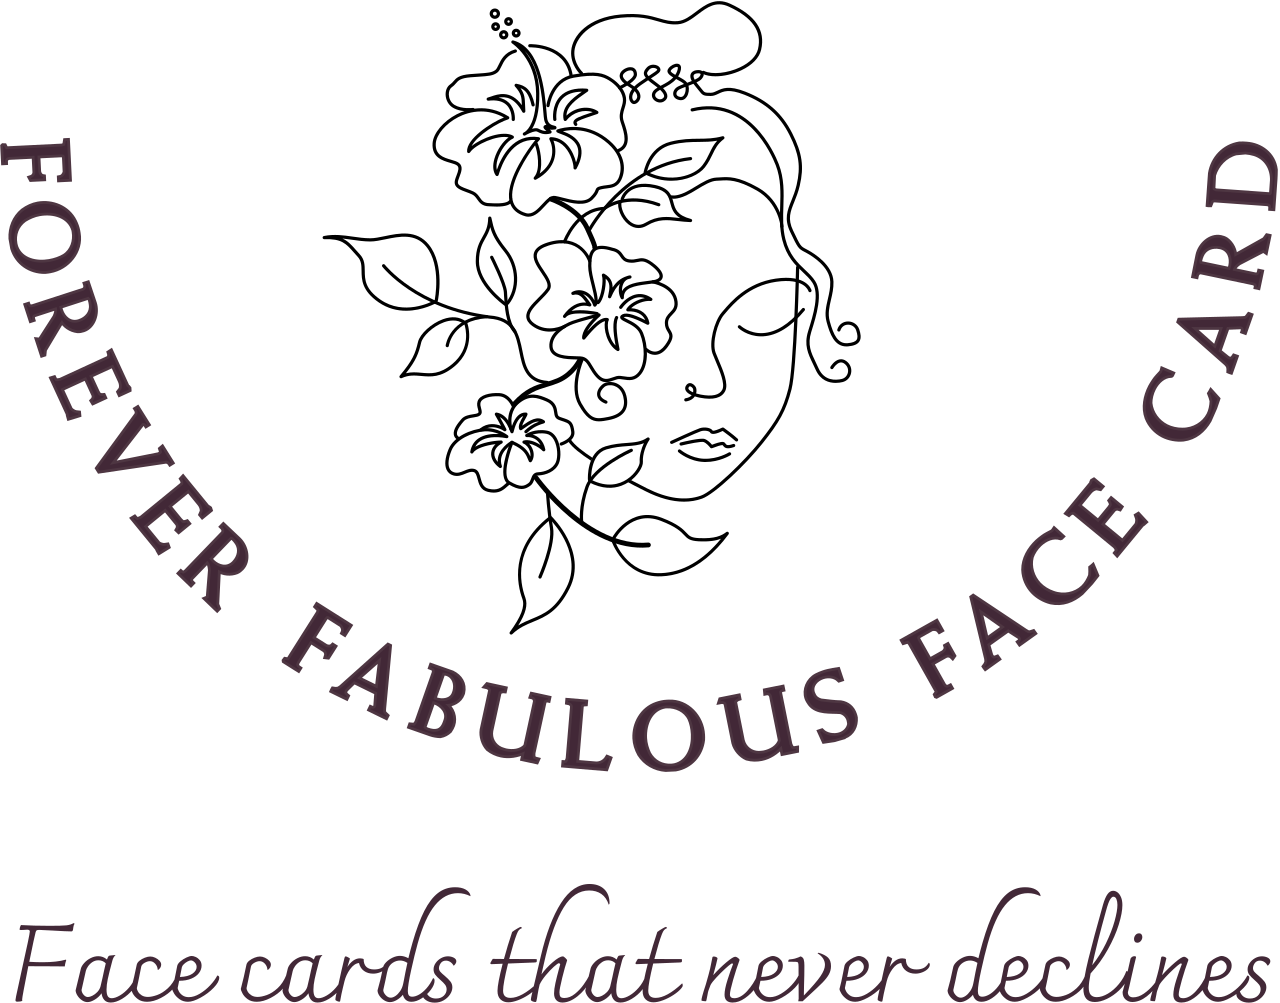 Forever fabulous face card's web page